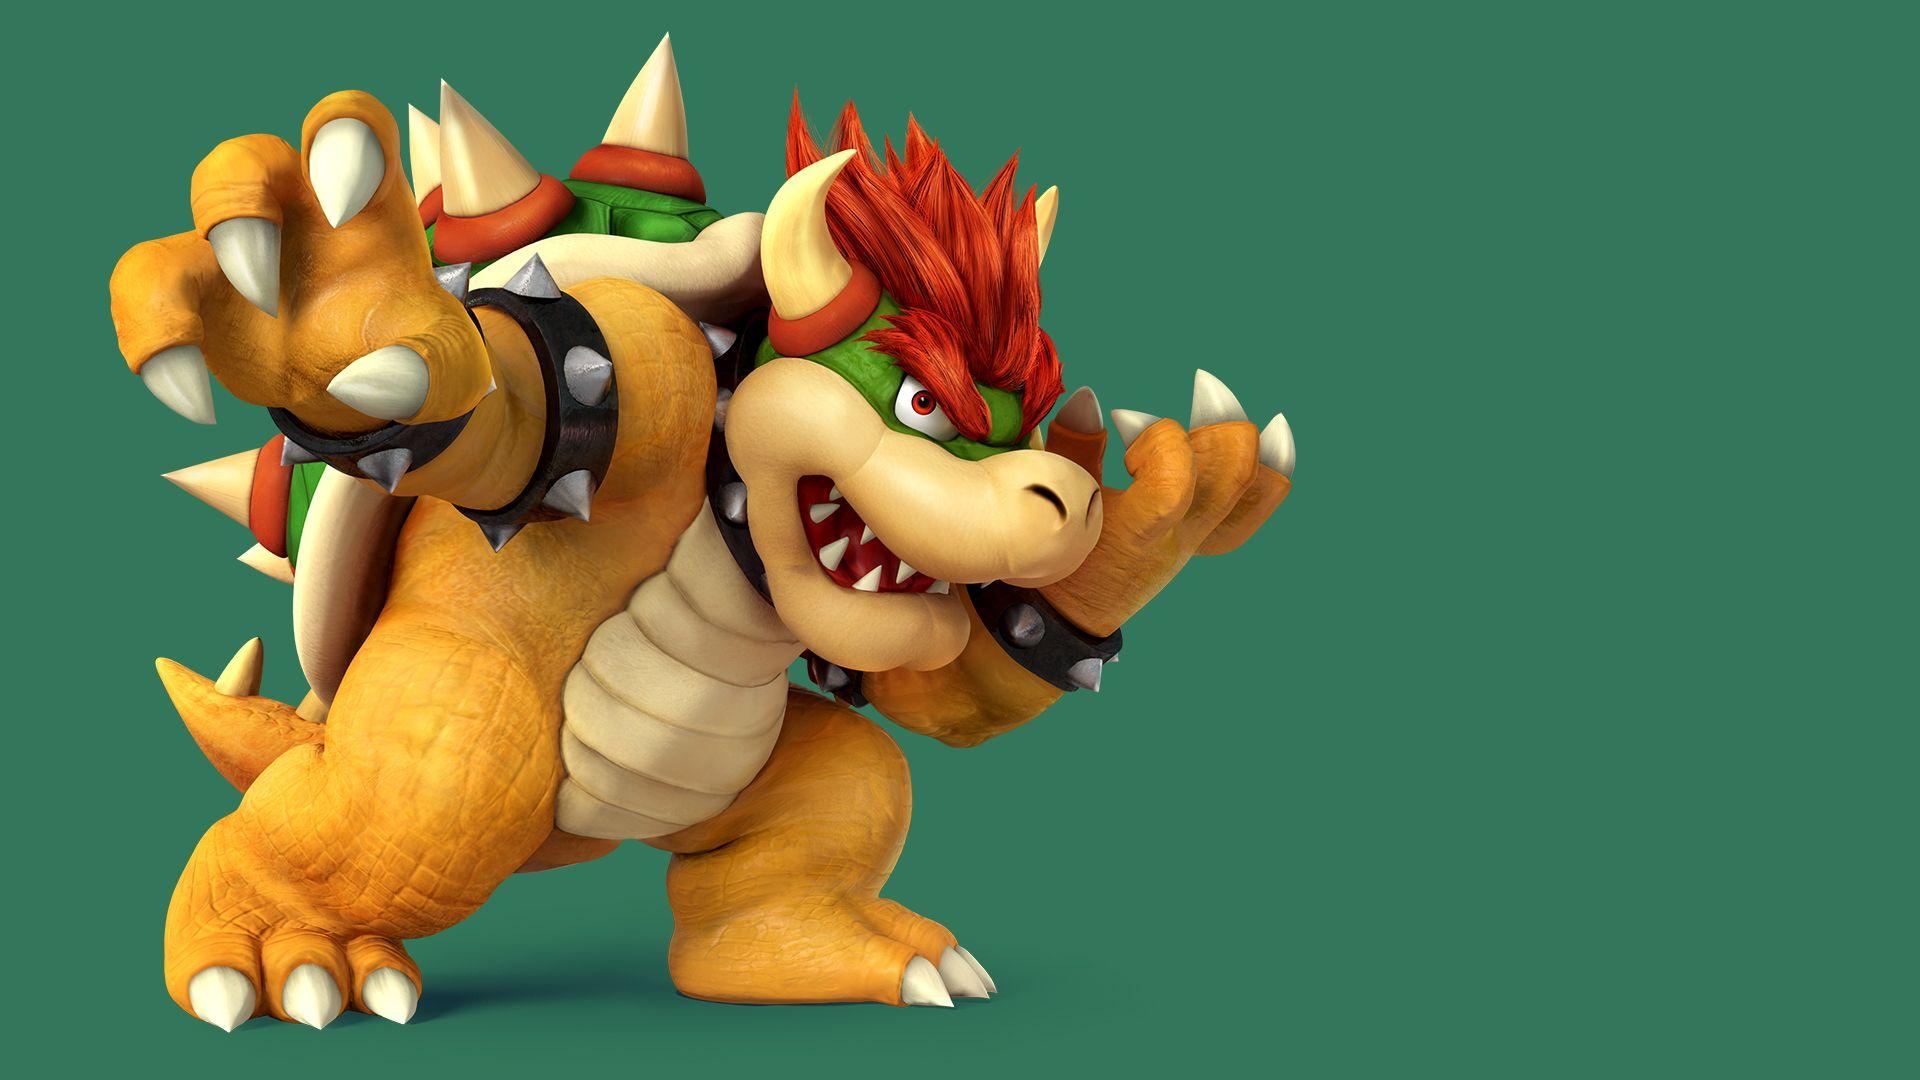 Bowser phone wallpaper 1080P 2k 4k Full HD Wallpapers Backgrounds Free  Download  Wallpaper Crafter